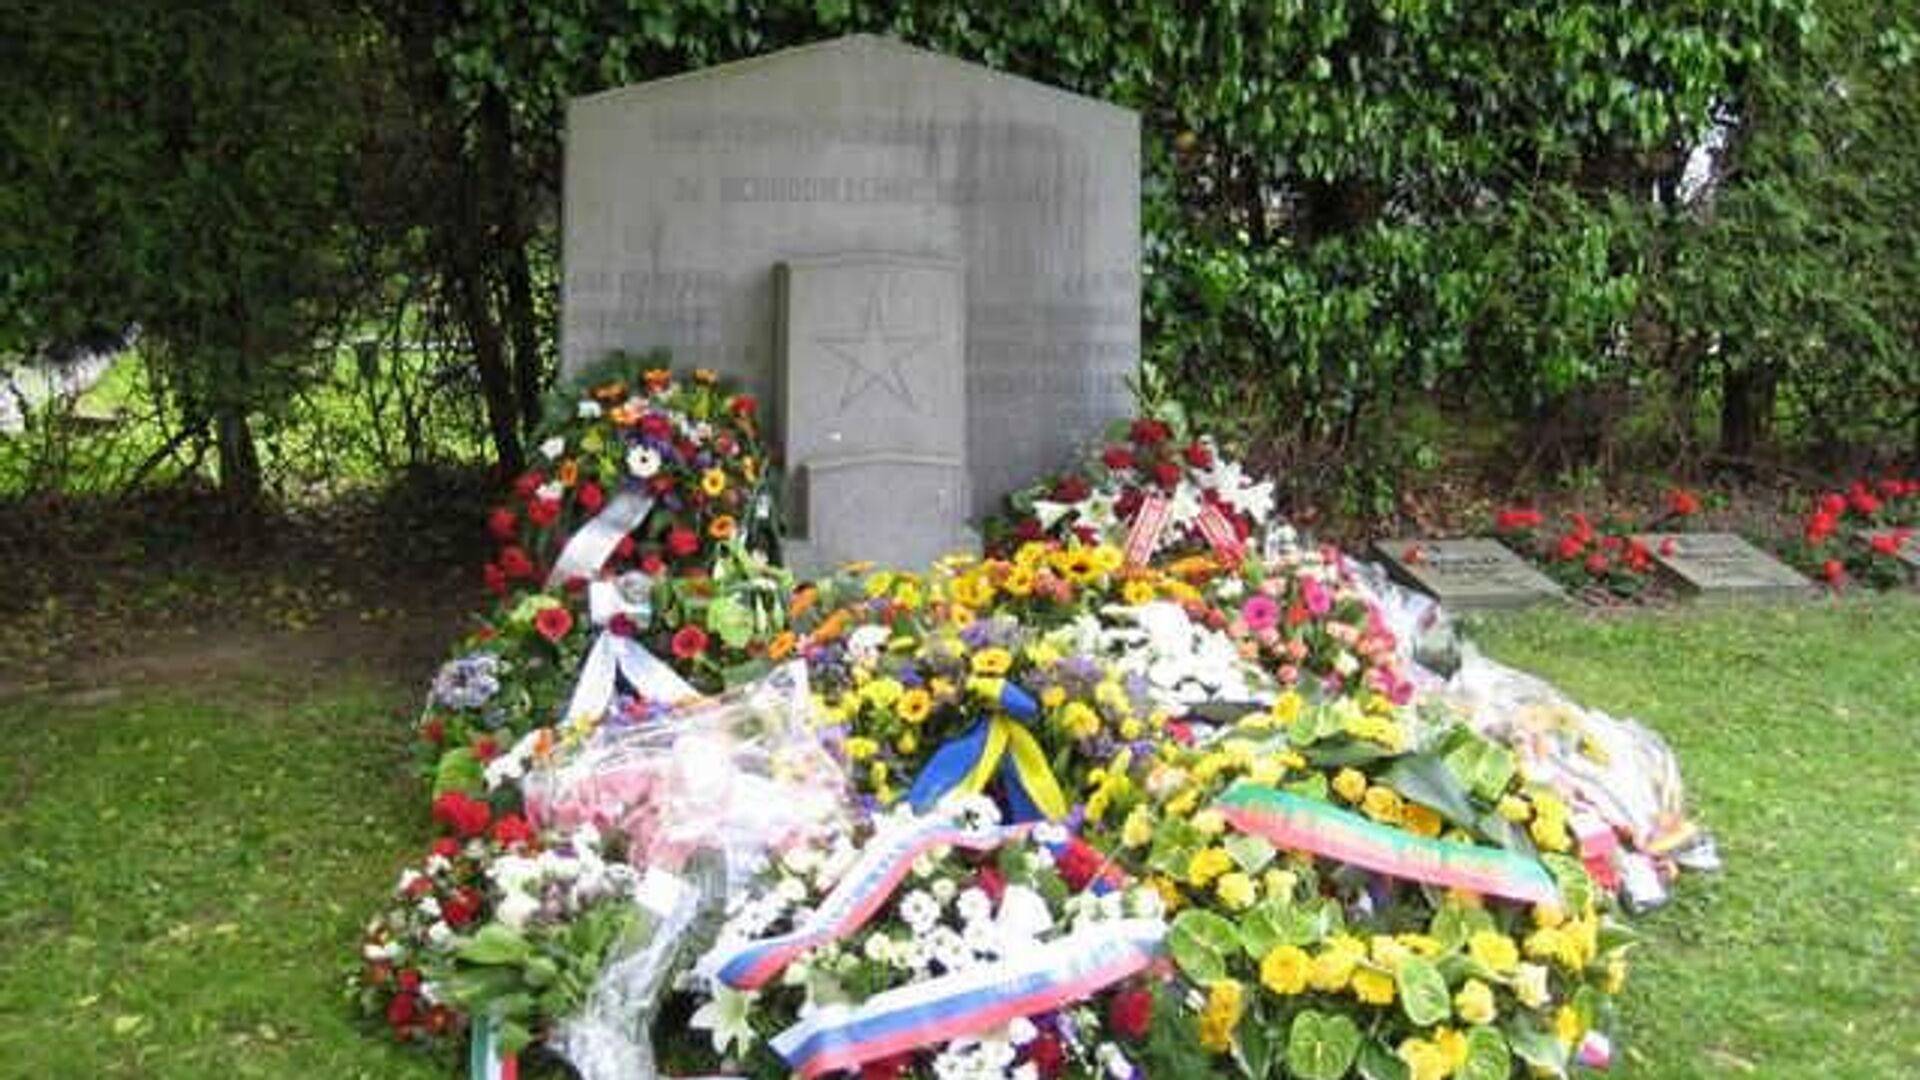 Diplomats of Russia and CIS countries honored the memory of Soviet soldiers in Belgium